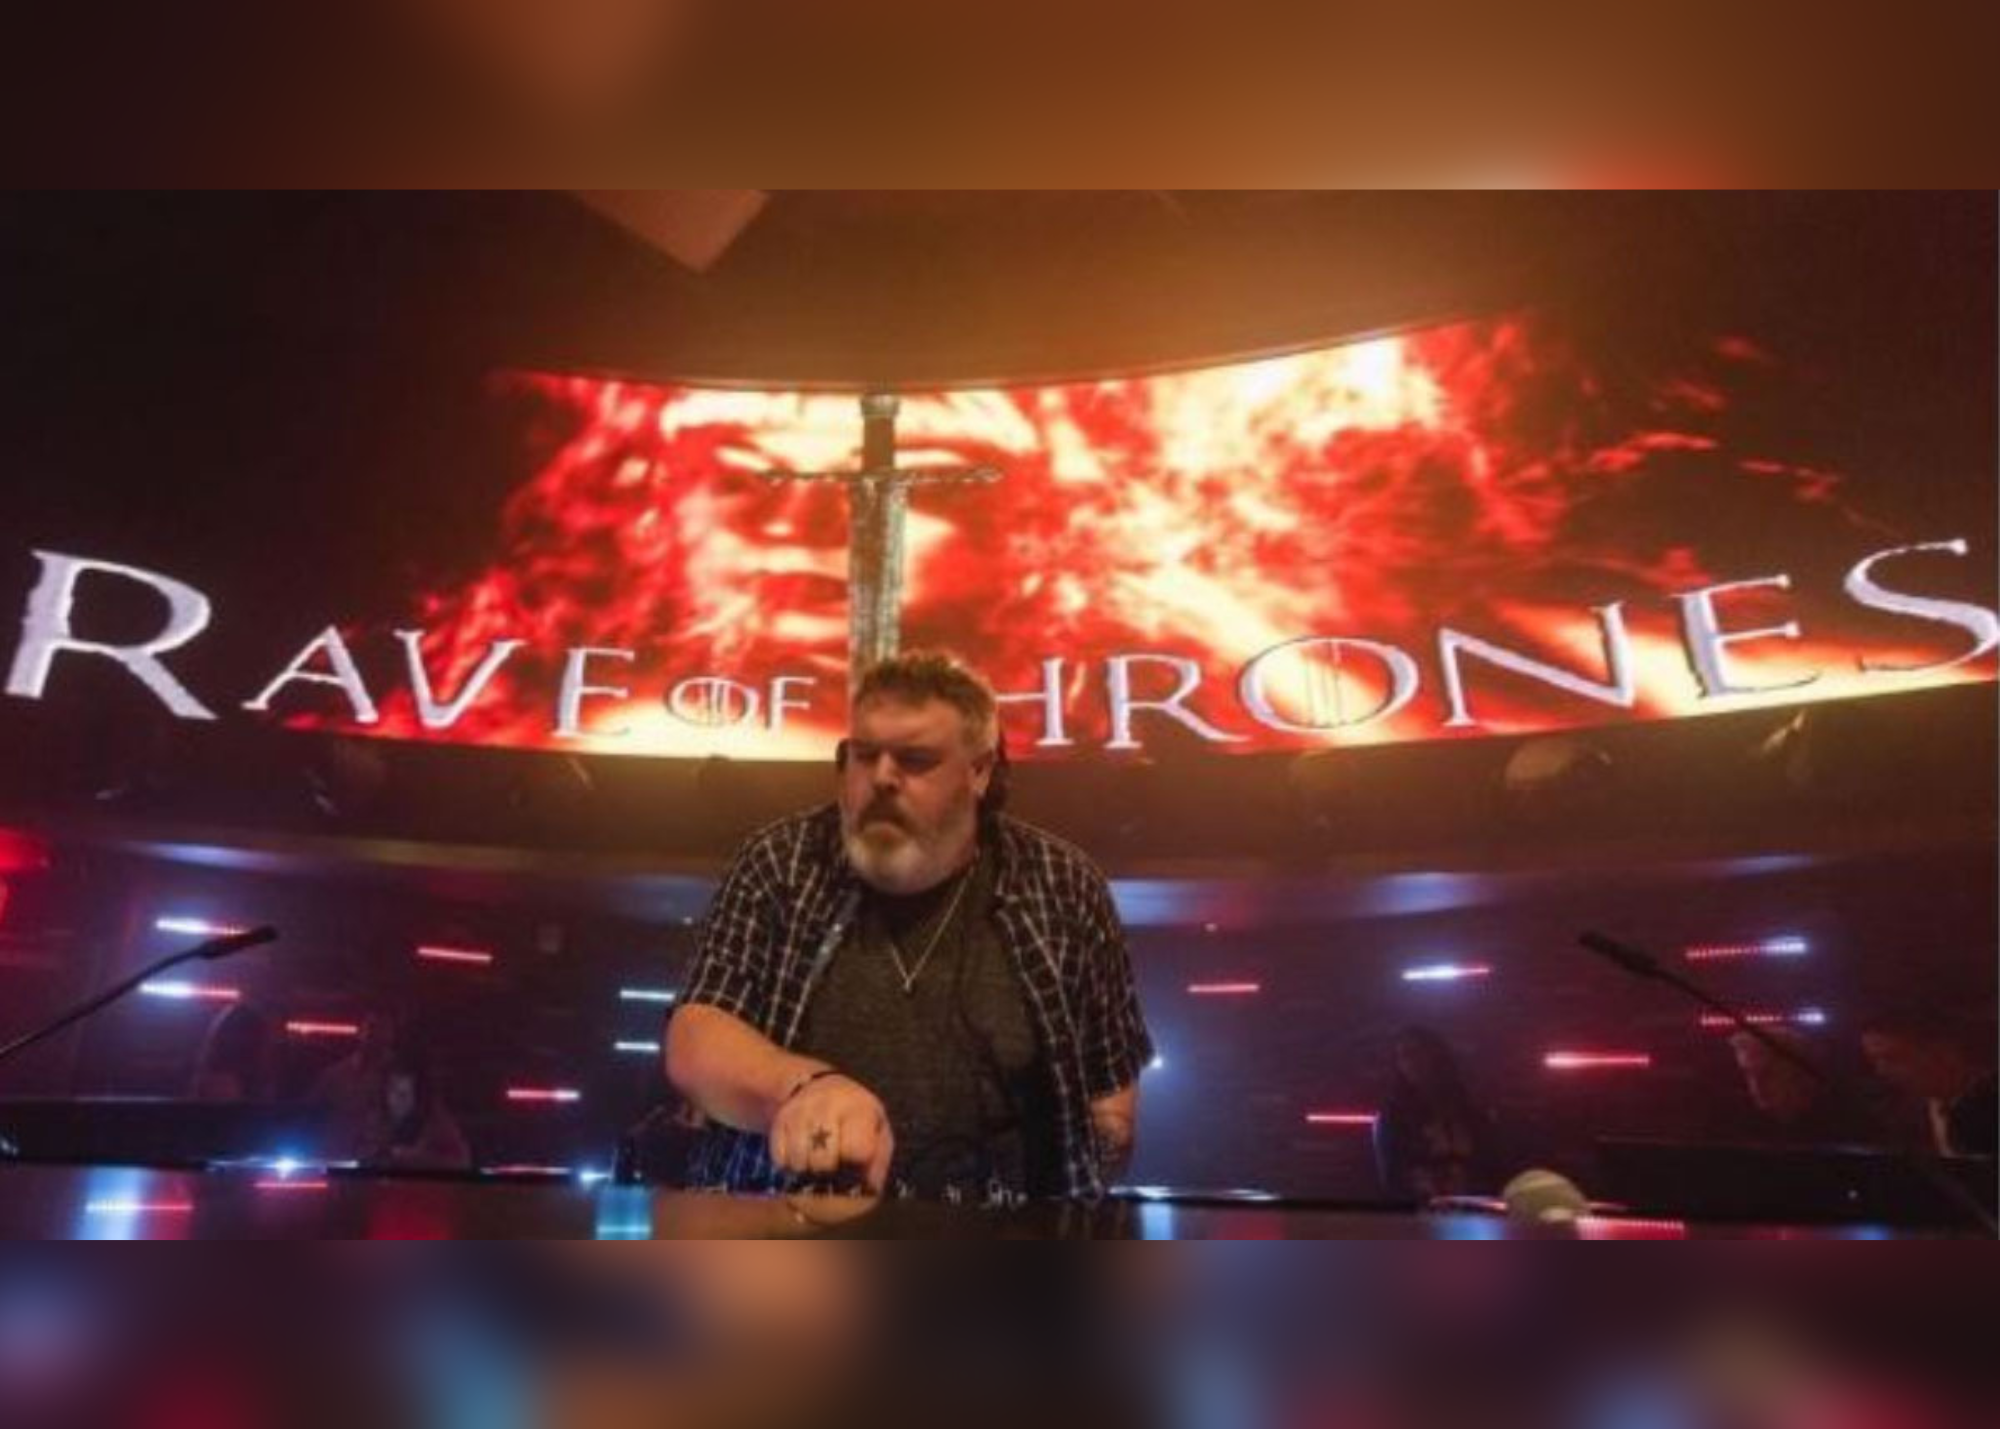 There's A 'Game Of Thrones' Rave Night Coming Up Where Hodor Is The DJ